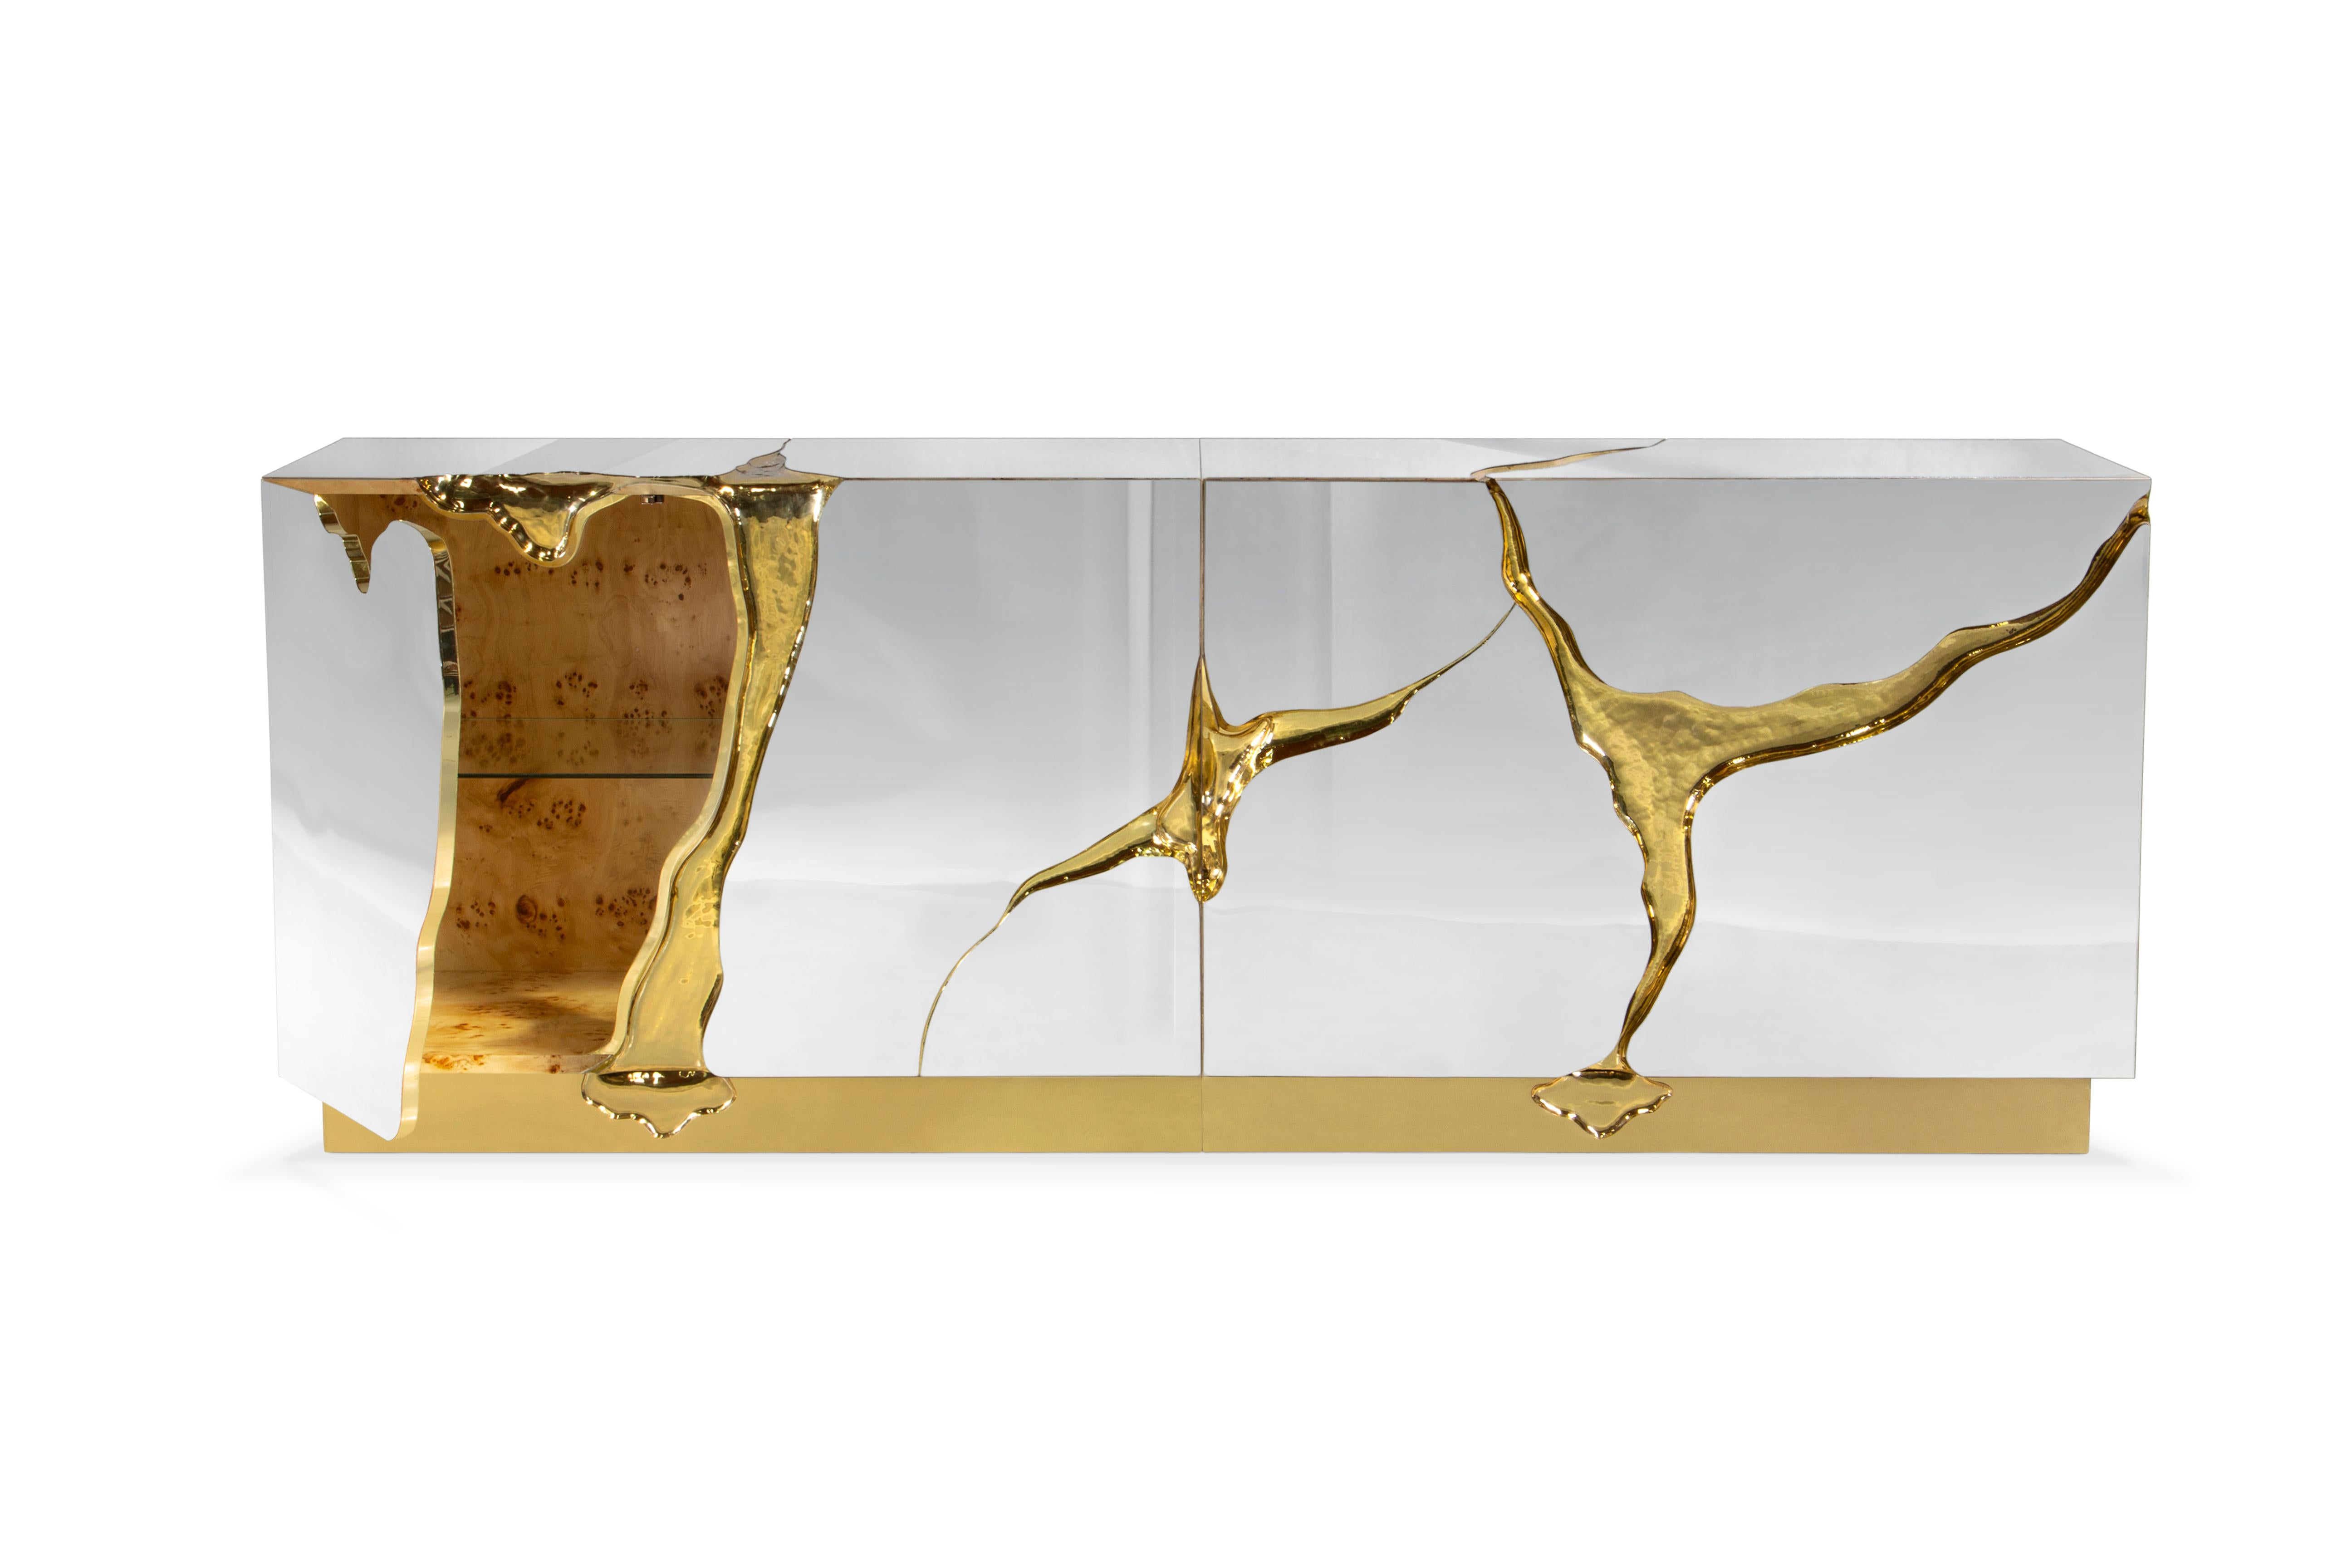 Modern Contemporary Lapiaz Gold Details Sideboard by Boca do Lobo

Modern Contemporary Lapiaz Gold Details Sideboard, this contemporary design piece features are achieved through the manual fitting of polished brass, and a sharp finish in polished